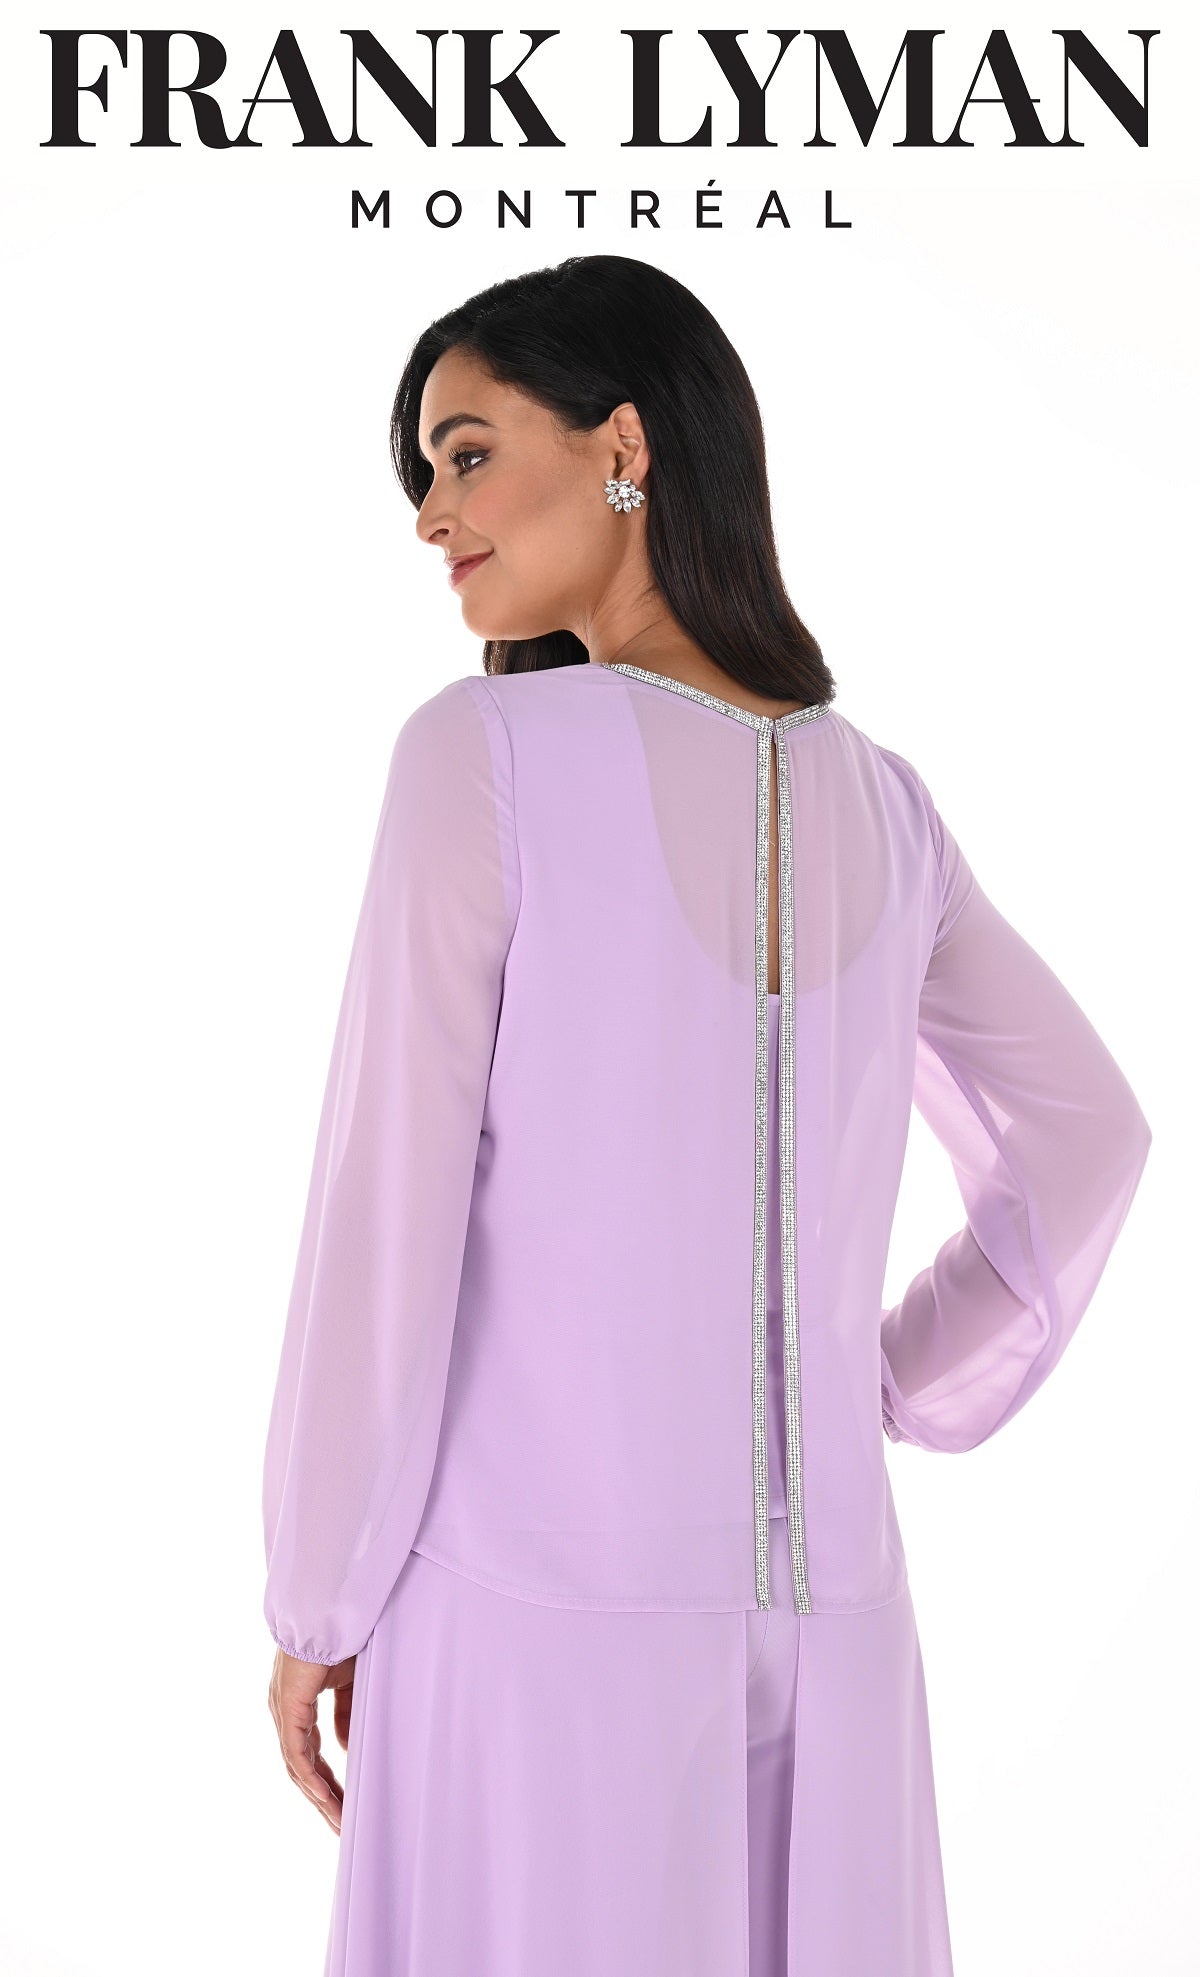 Frank Lyman Montreal Amethyst Evening Top with Back Embellished Detail